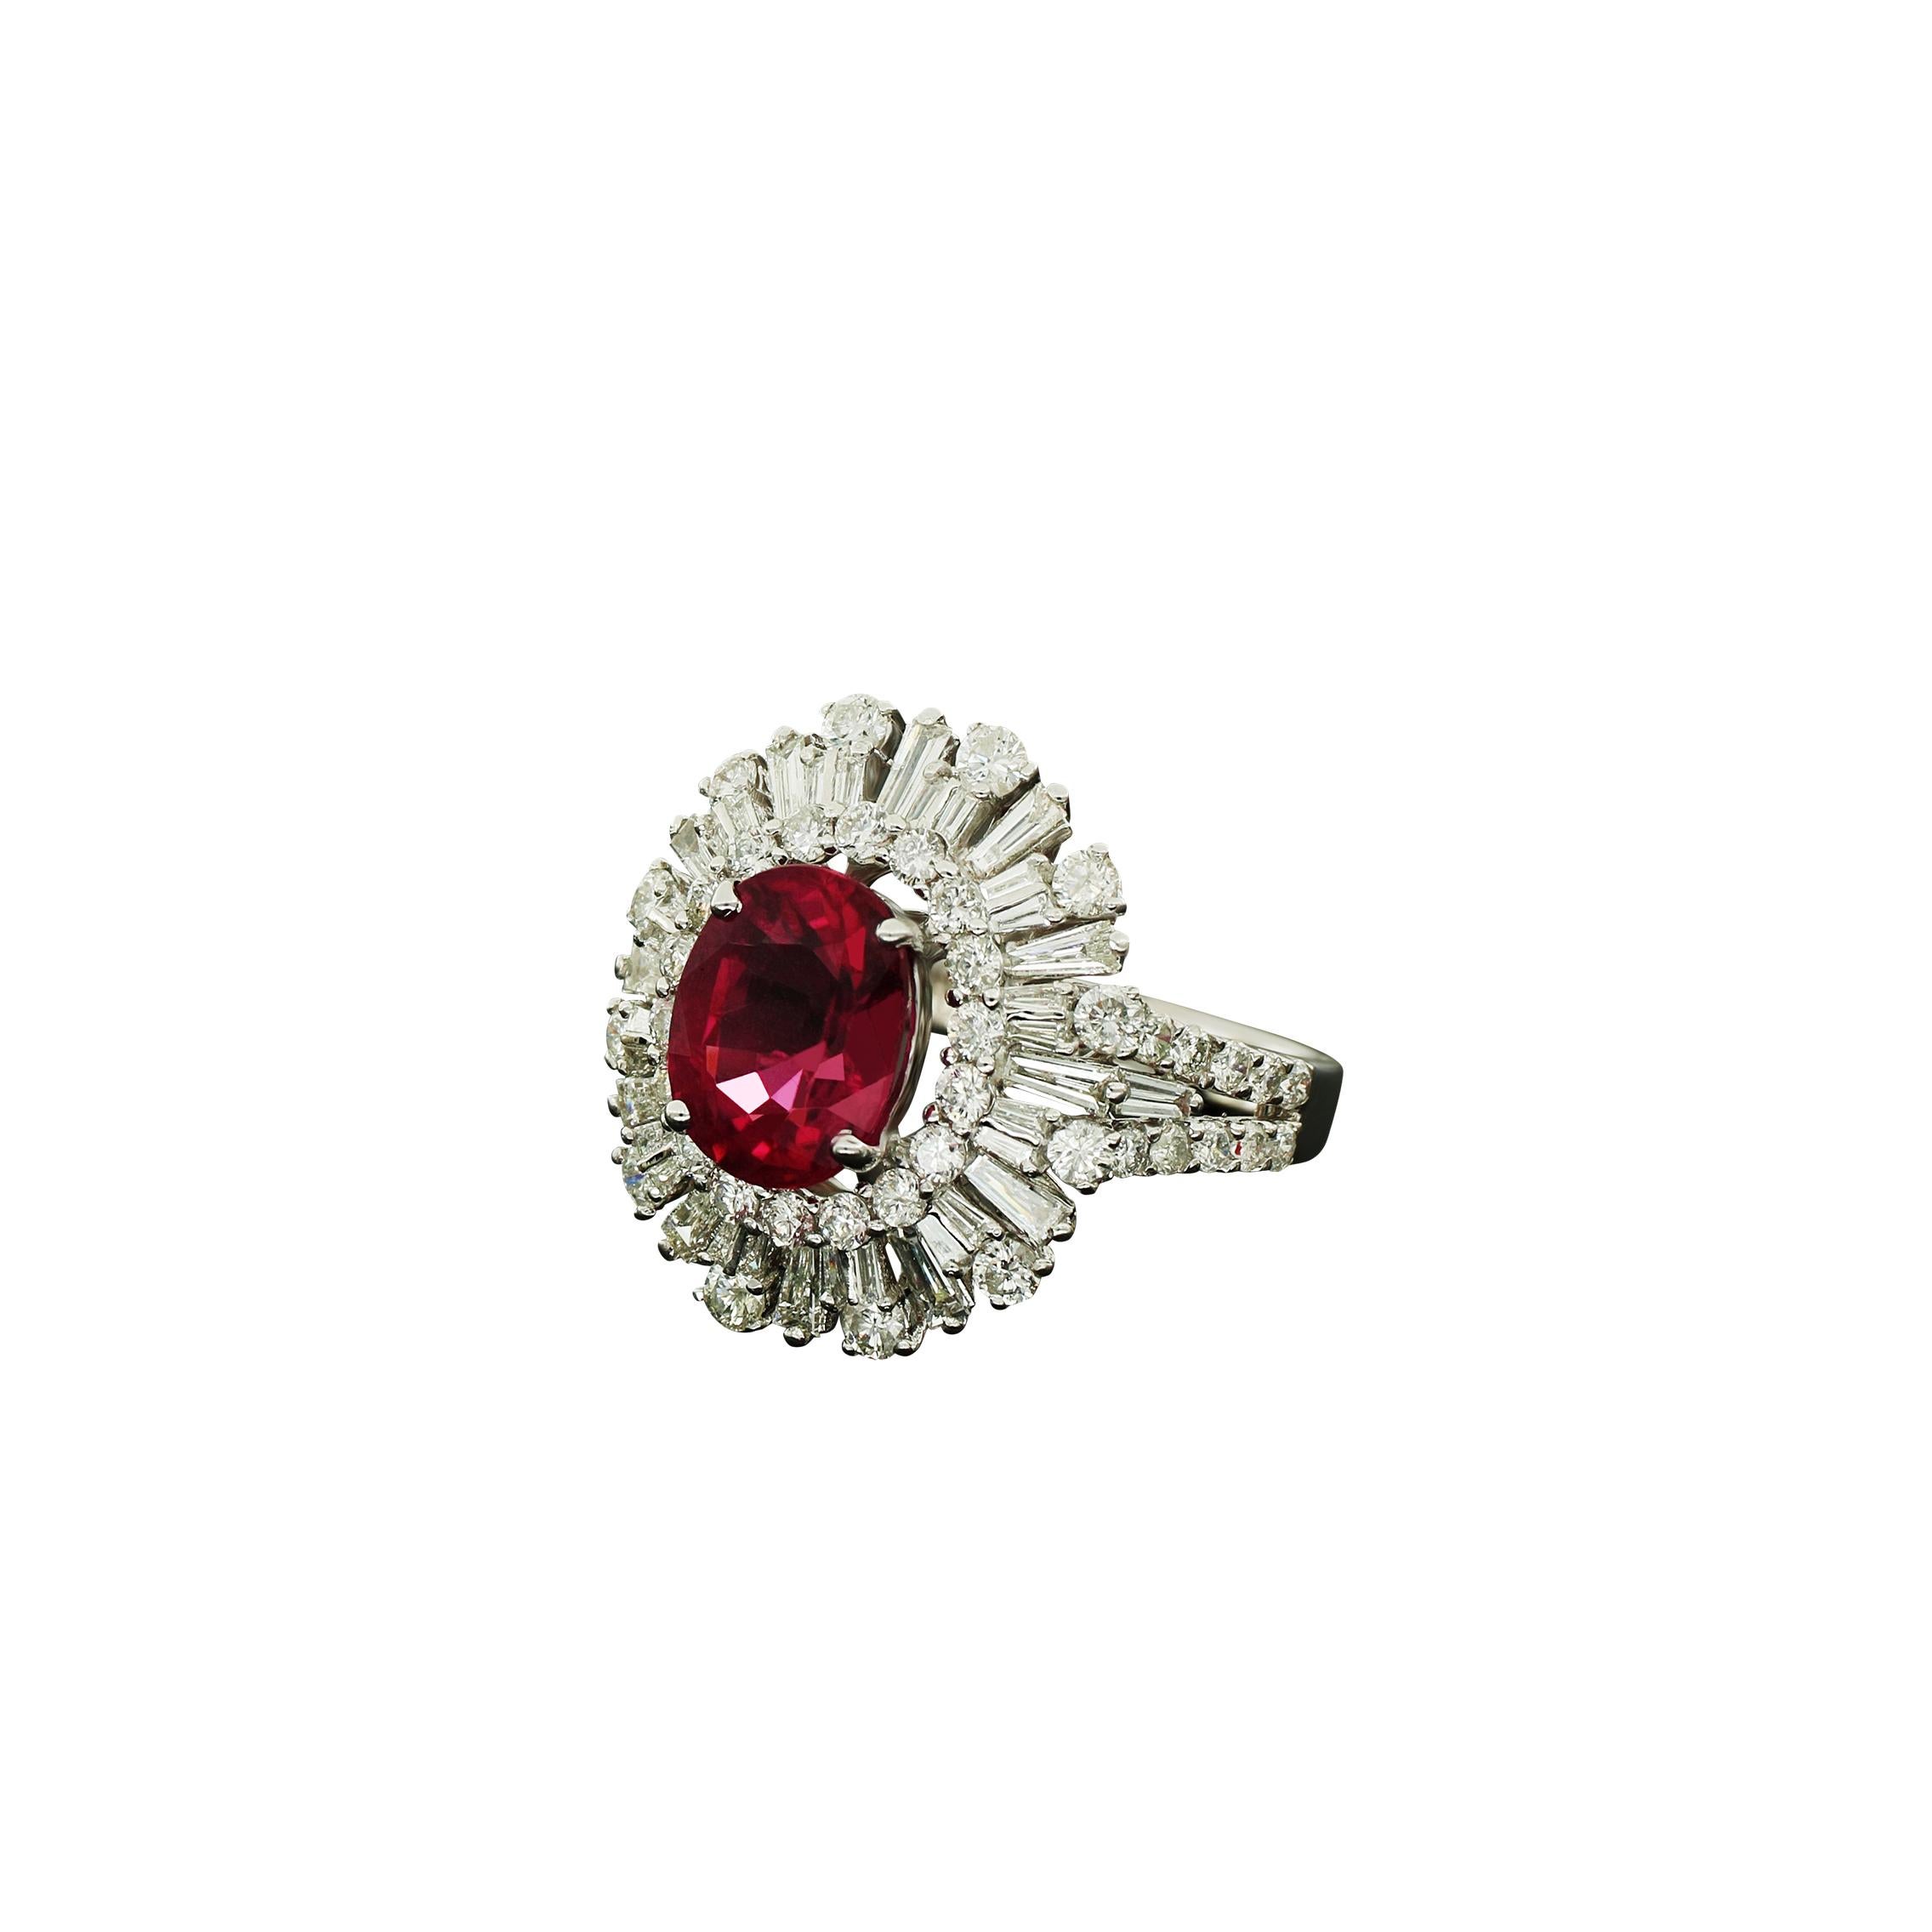 Classy and elegant 18K white Gold Amwaj Ring with Diamonds. Exquisite decorative detailing makes this significant ring a true standout. Featuring center Ruby nestled beside shimmering small Round and Baguette shape diamonds, this beautiful Ring